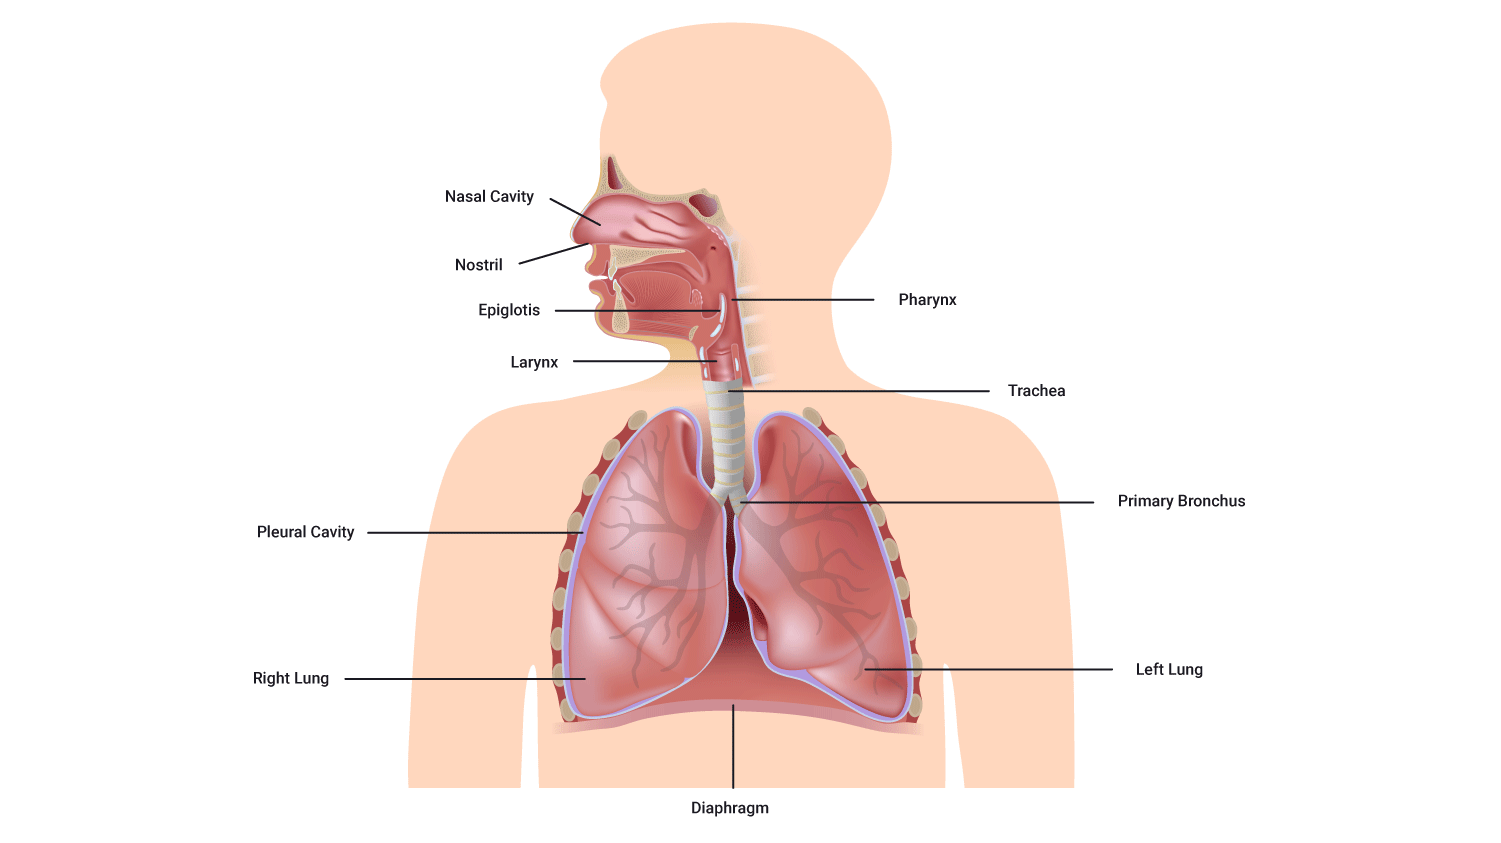 Image showing components of respiratory system